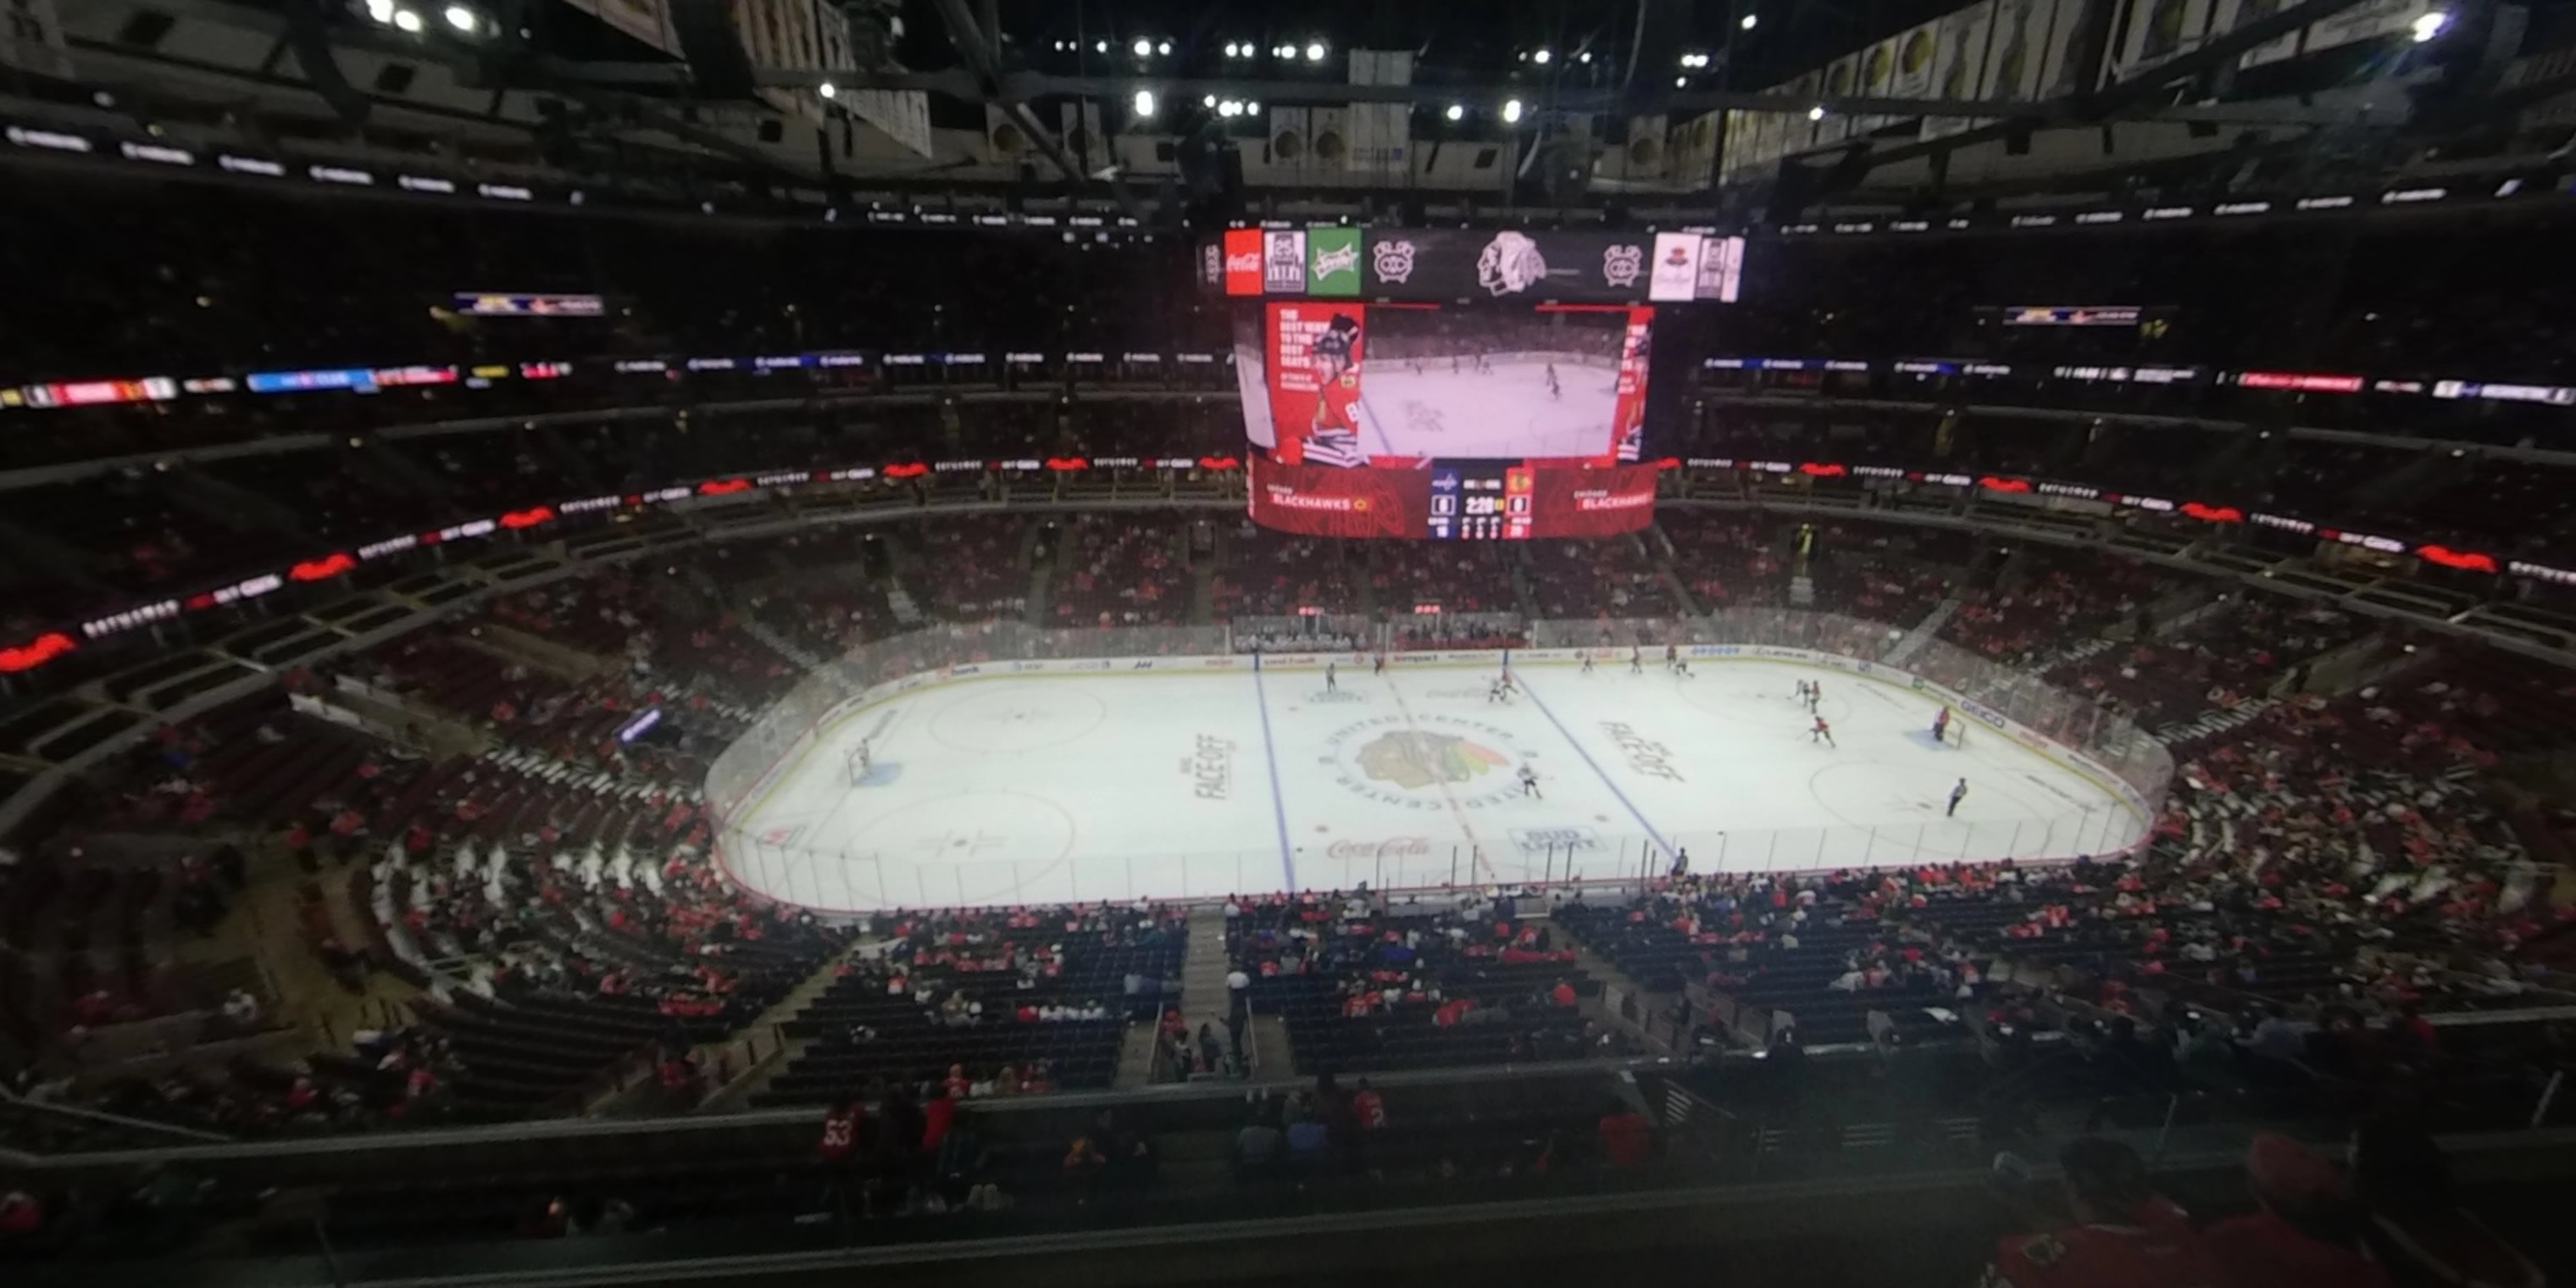 Section 318 At United Center Rateyourseats Com